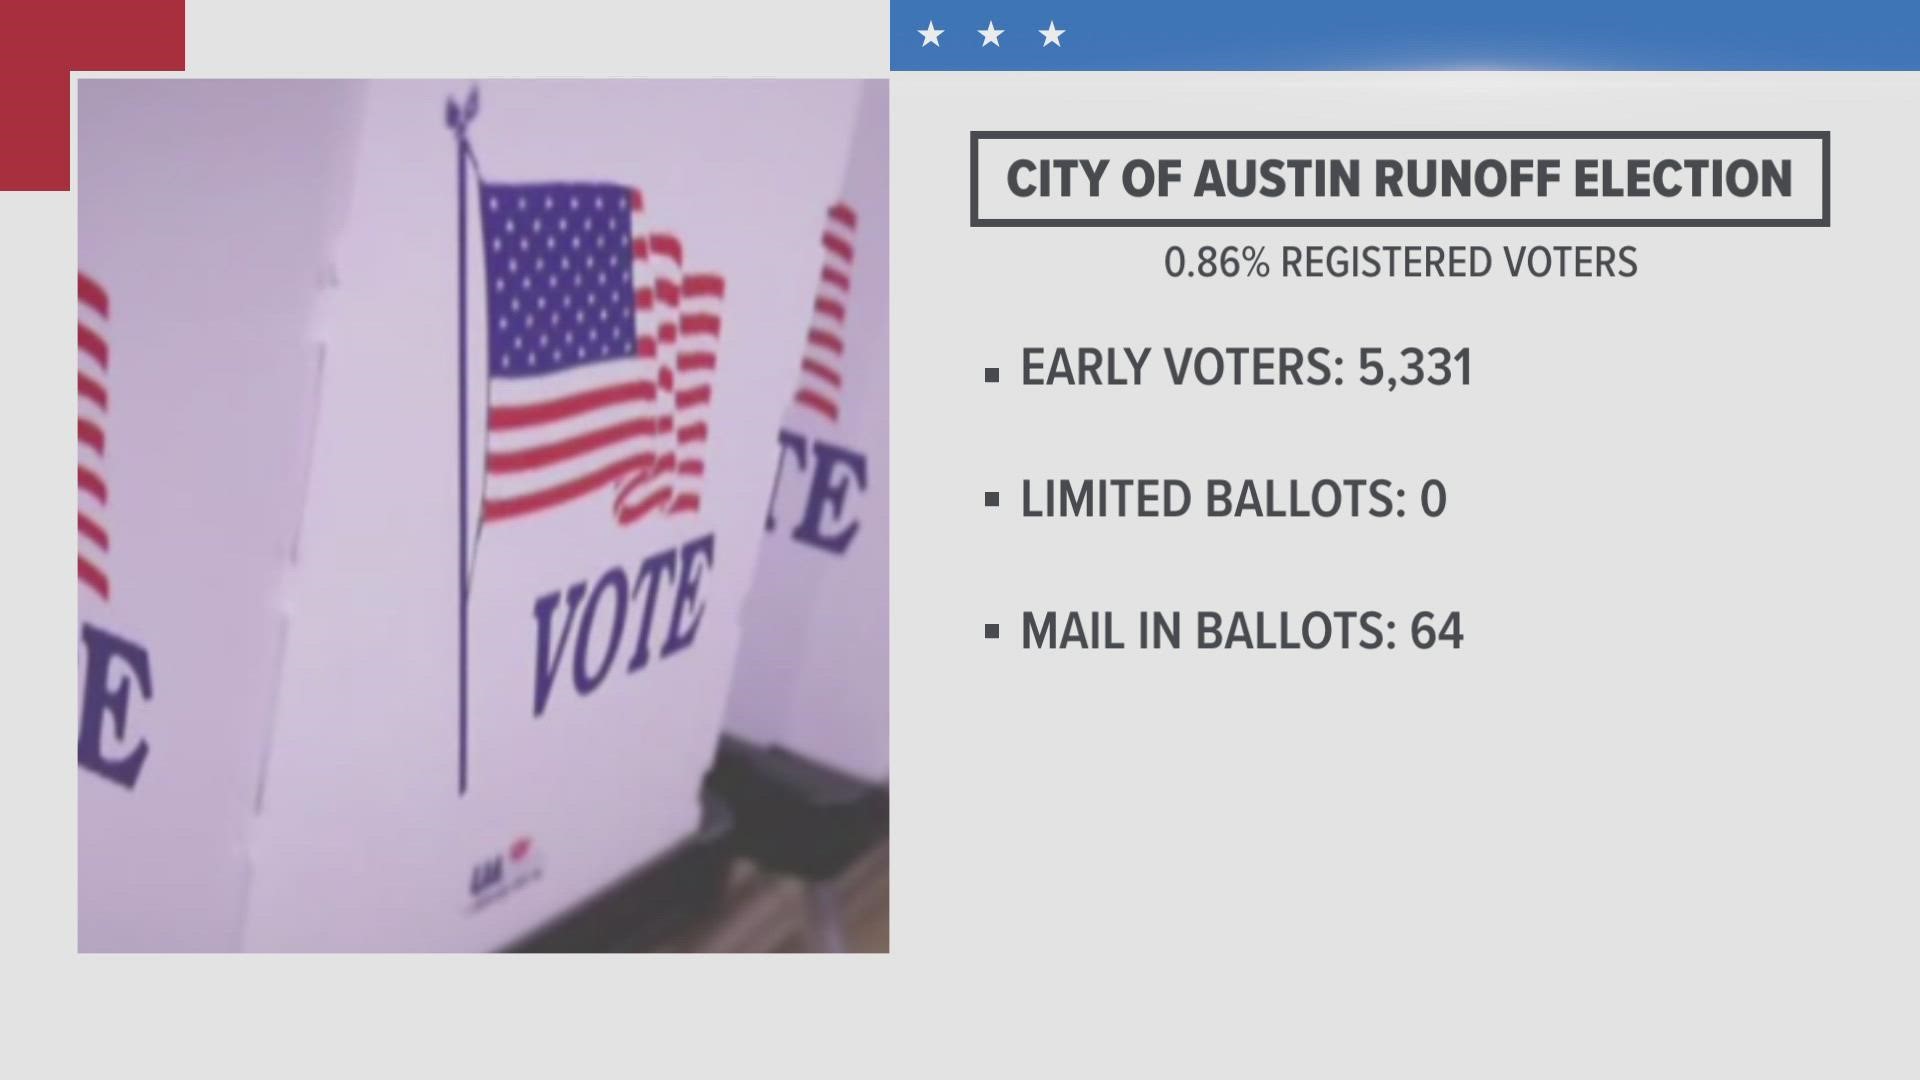 As of Dec. 1, only 5,331 ballots had been cast in the runoff election.